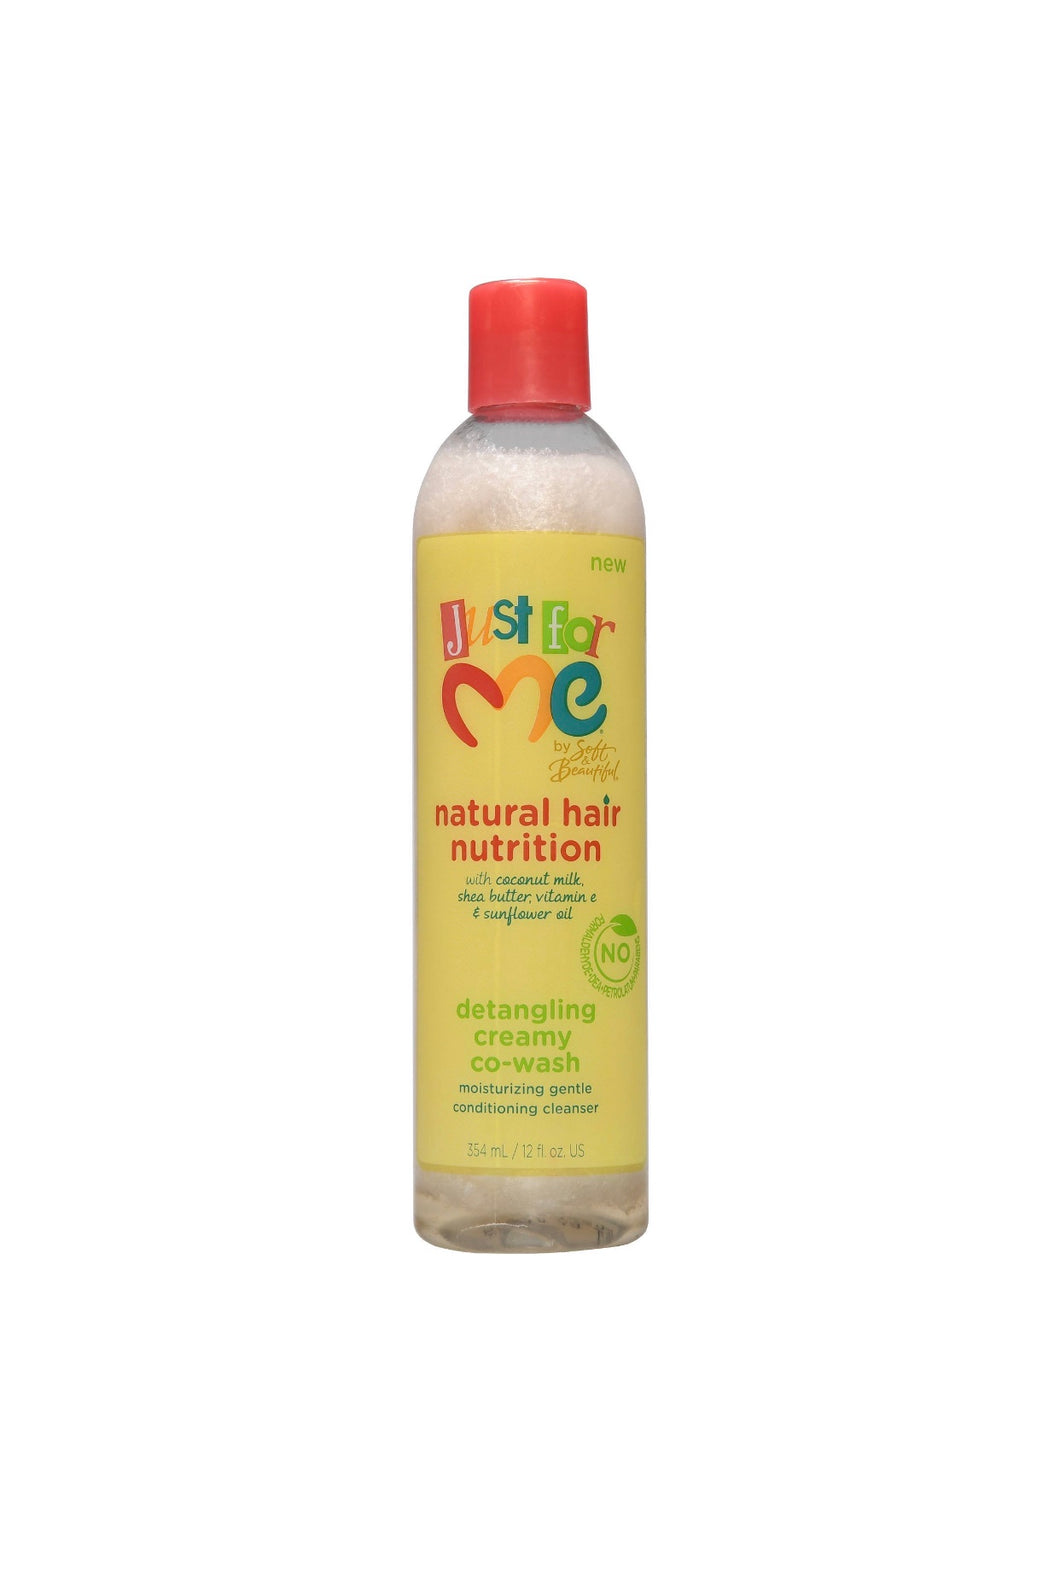 Just For Me Natural Hair Nutrition Detangling Creamy Co-Wash